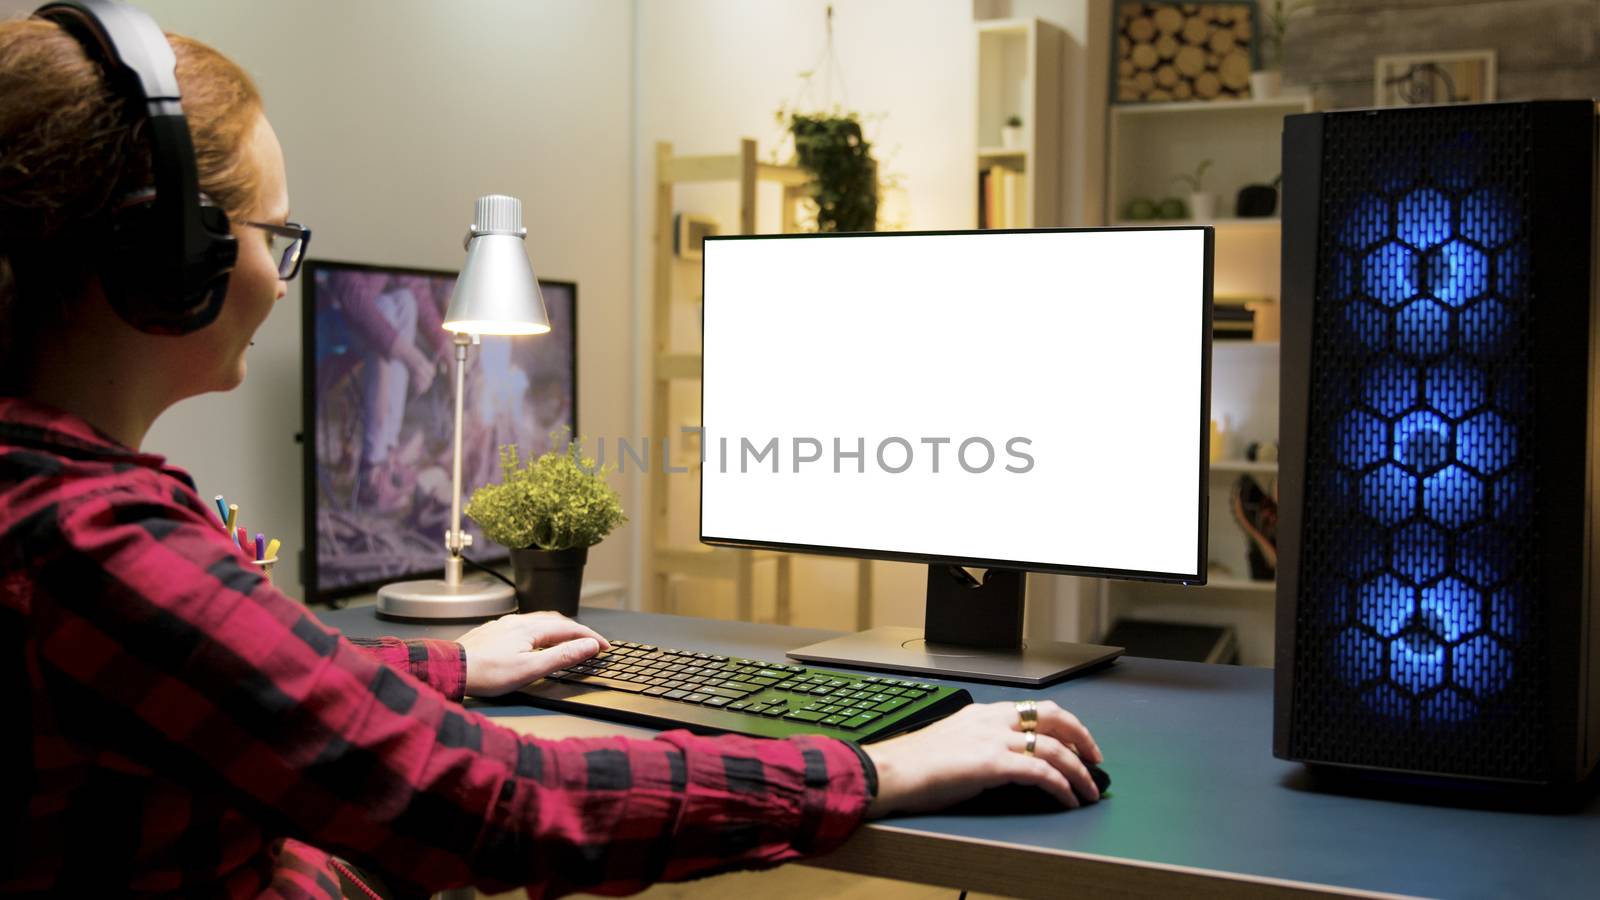 Woman with headphones playing games on green screen computer in living room. Woman sitting on gaming chair.